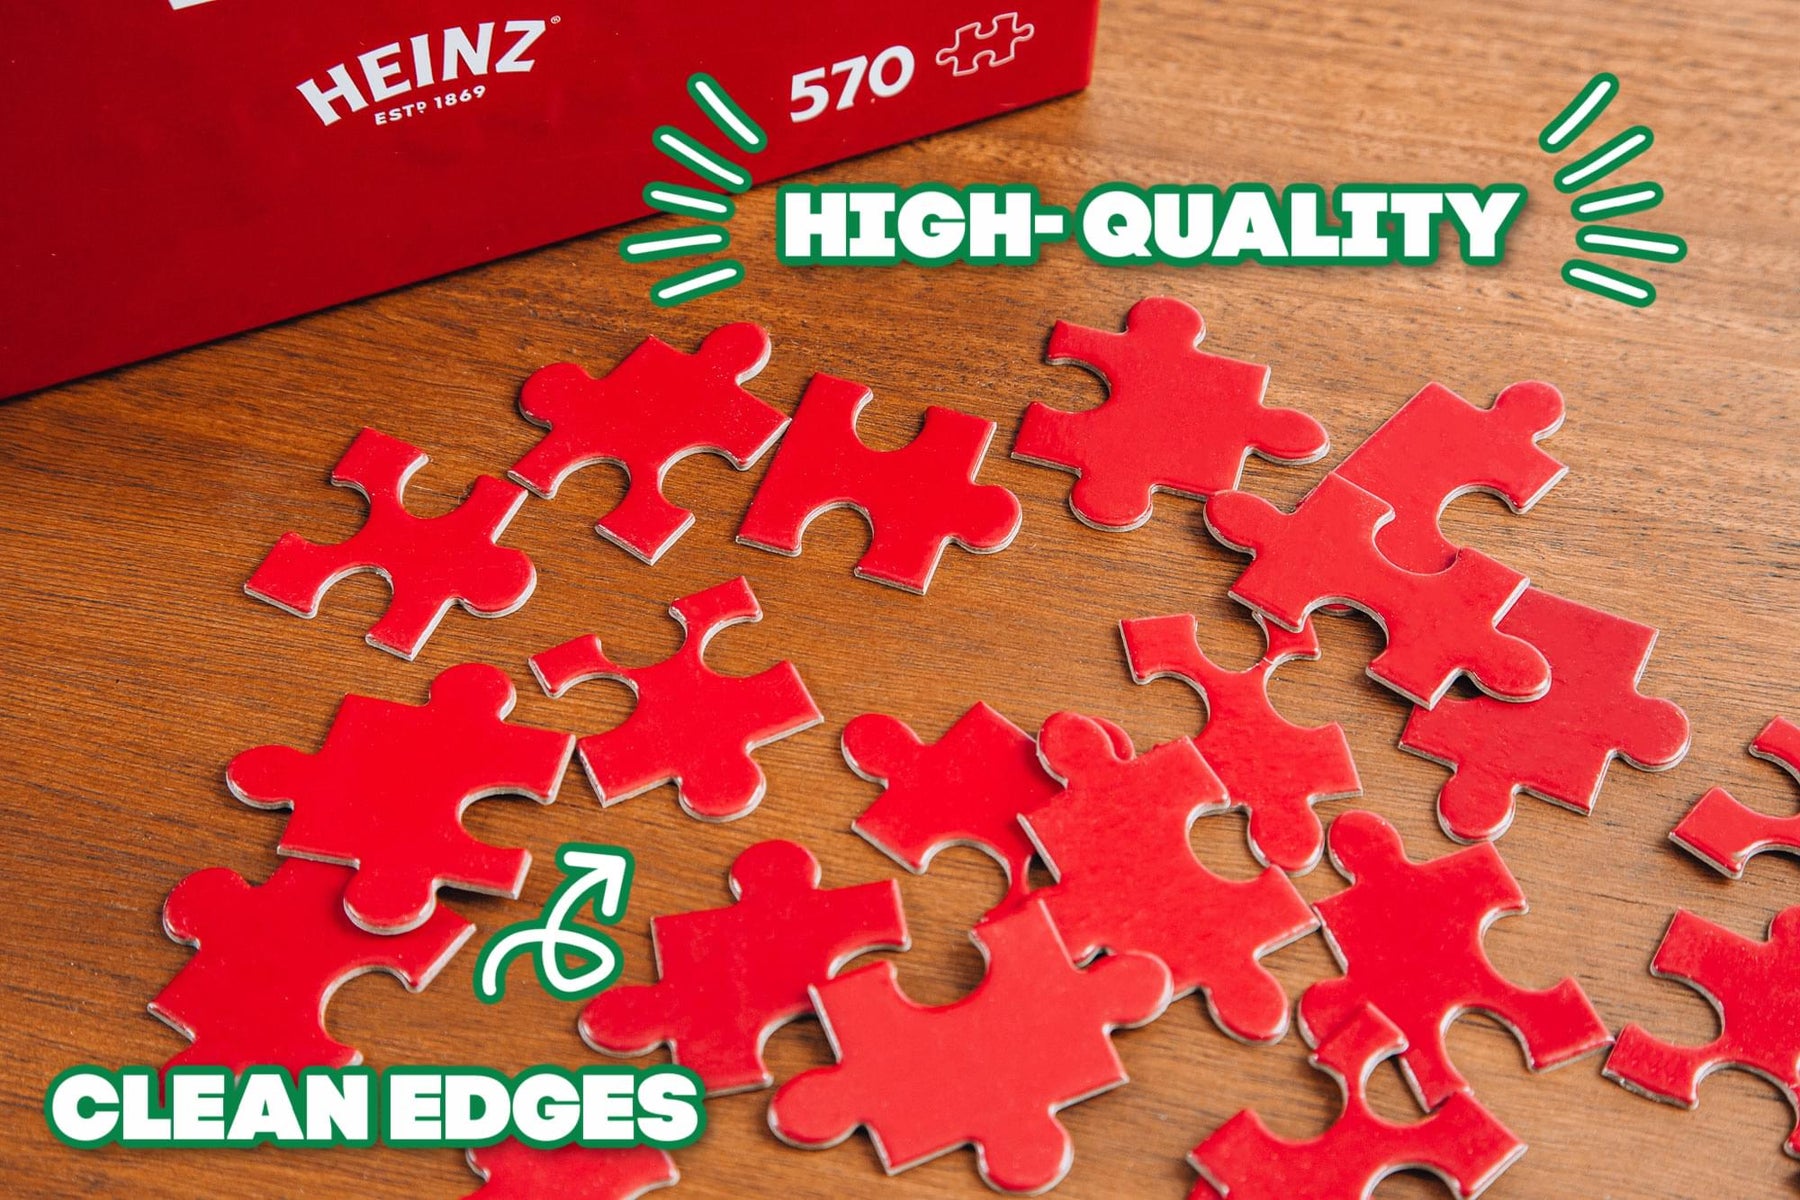 Heinz Ketchup All-Red Food Puzzle For Adults And Kids | 570 Piece Jigsaw Puzzle